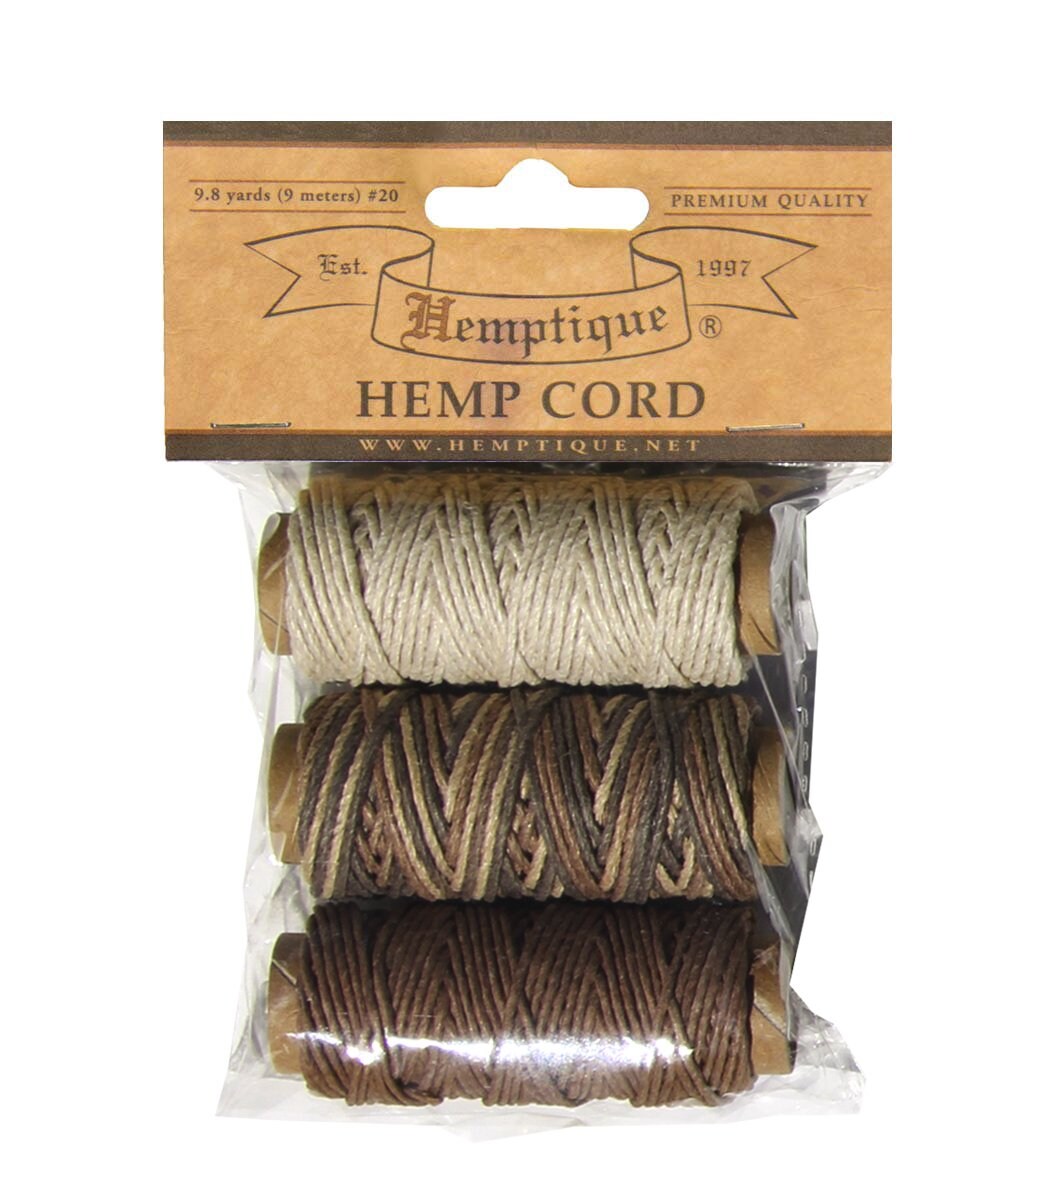 Hemptique 3pc Hemp Cord Mini Spool Bag Set Eco Friendly Sustainable Naturally Grown Jewelry Bracelet Making Paper Crafting Scrapbooking Bookbinding Mixed Media Crocheting Macrame Seasonal Holiday Gift Wrapping Outdoor Gardening